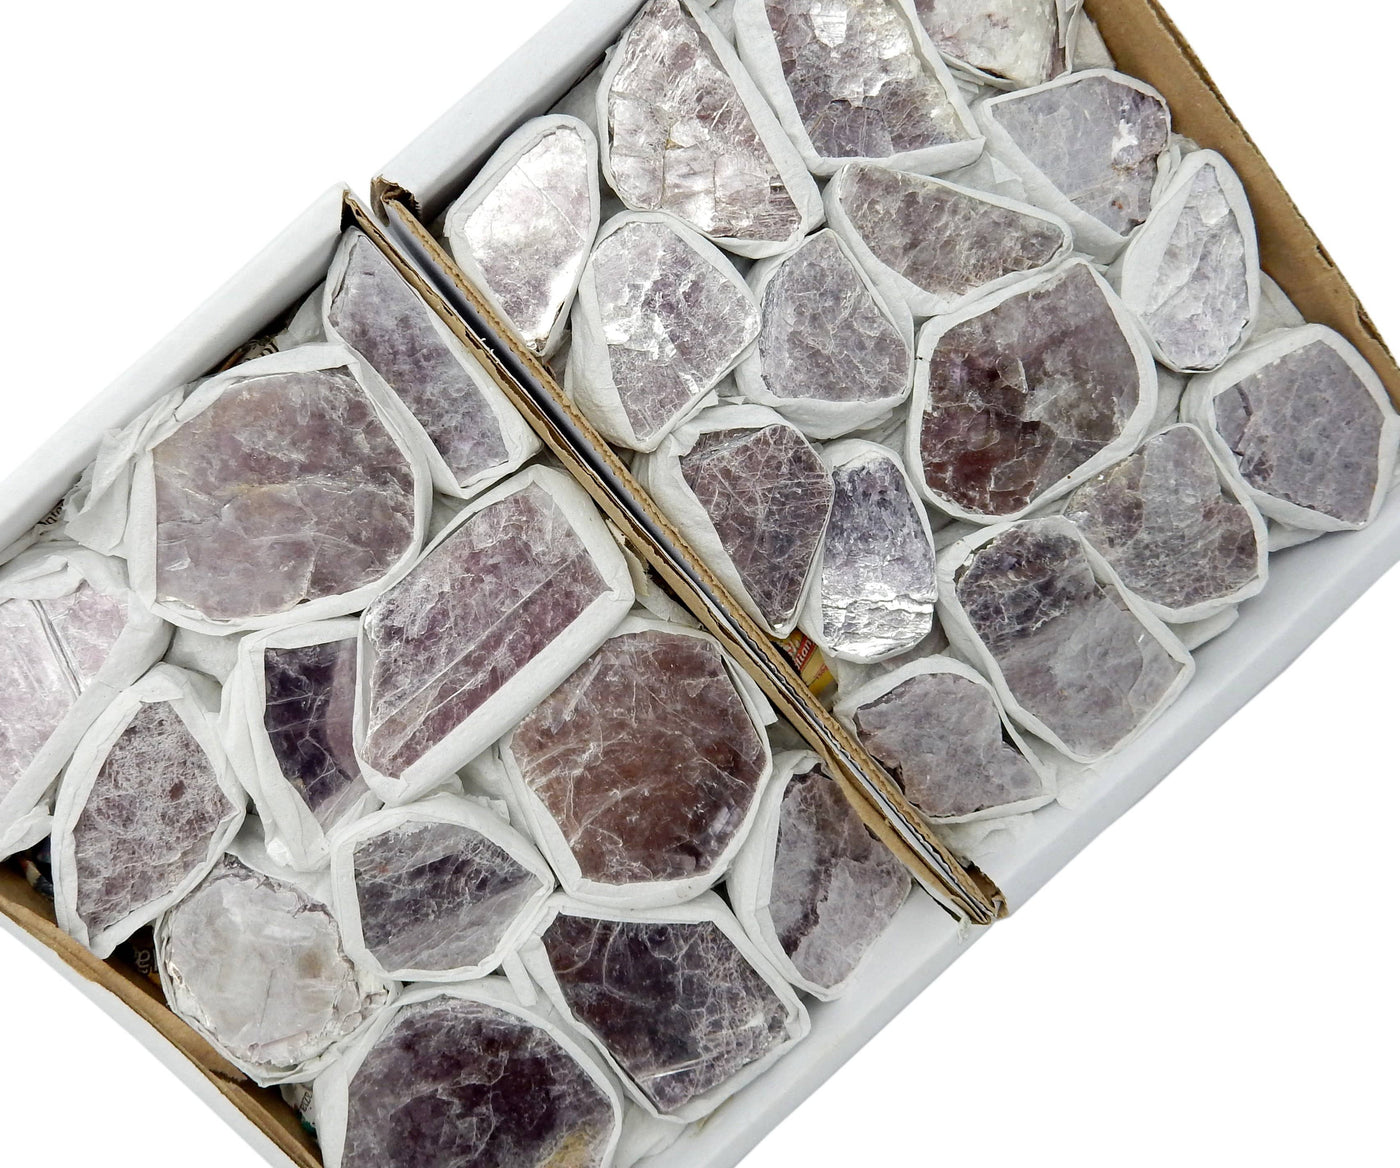 2 Lepidolite Mica Flat Boxes showing color size and shapes of stones in this stock available